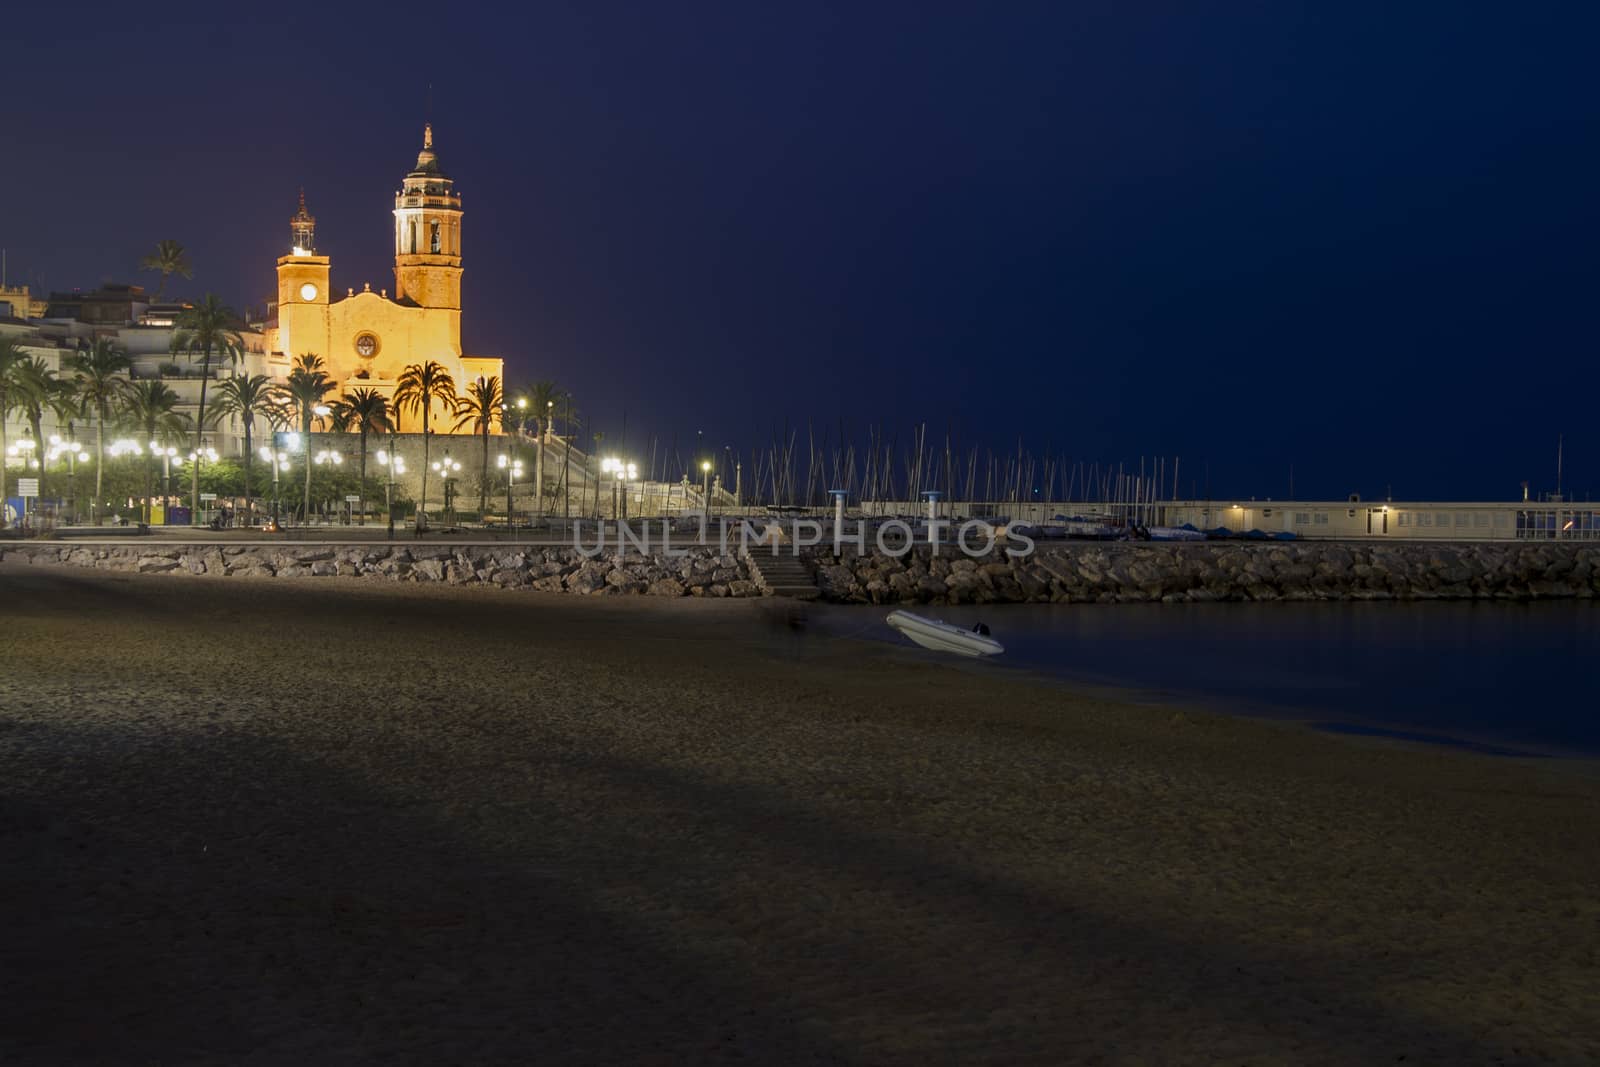 Night scene in Sitges, Spain by tanaonte